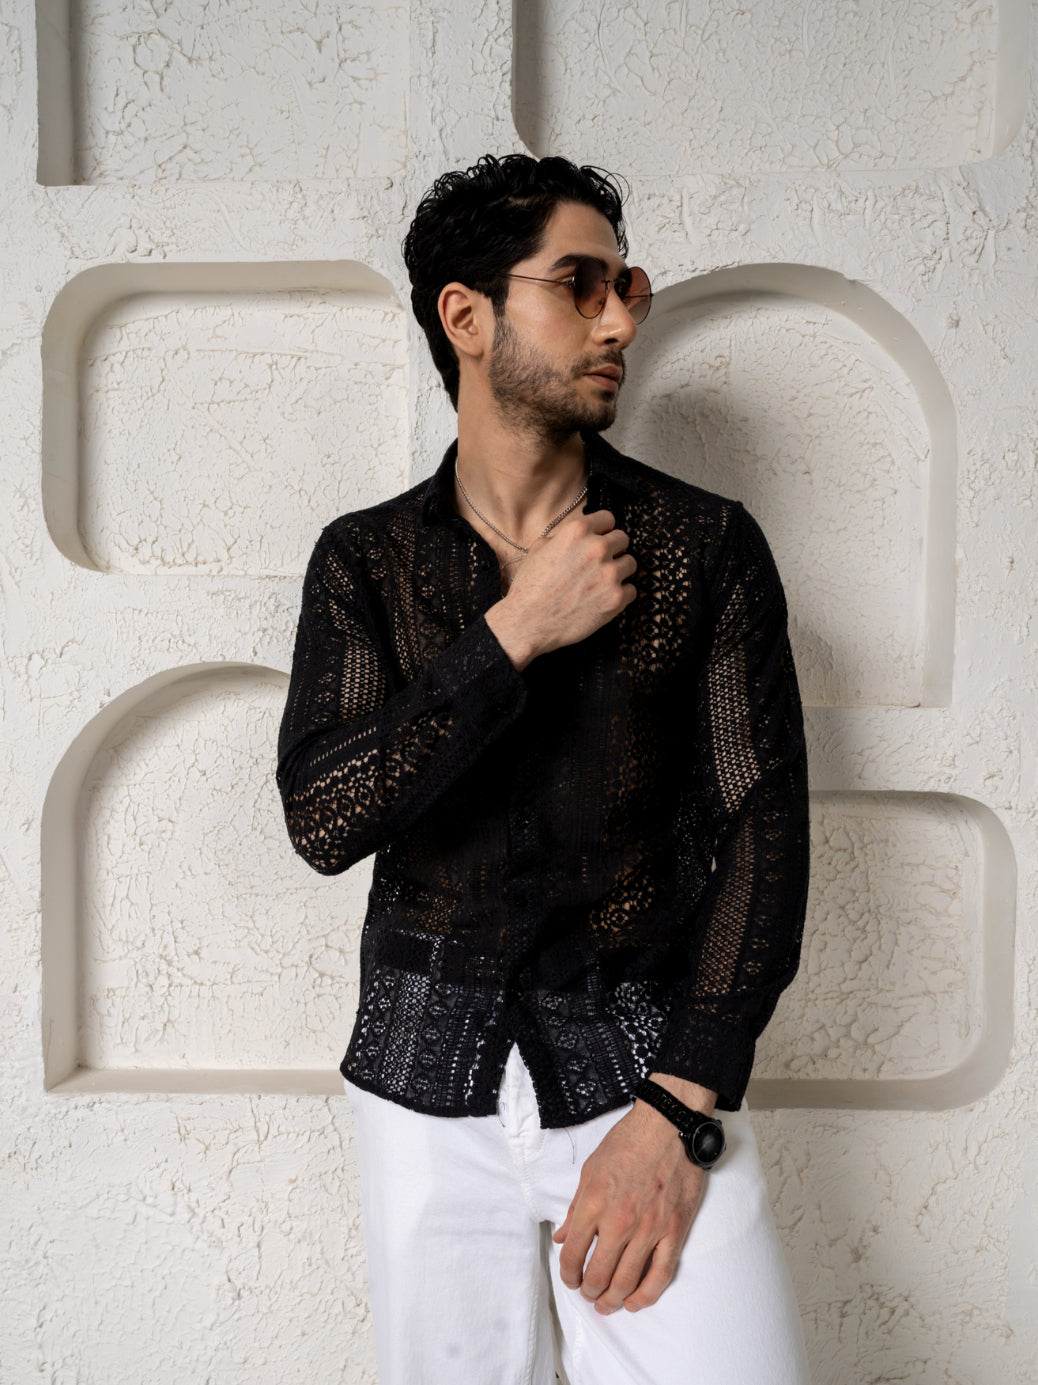 Firangi Yarn Crochet Cotton Black Lace Shirt For Men- Full Sleeves(Take One Size Bigger Than Your Usual Size)